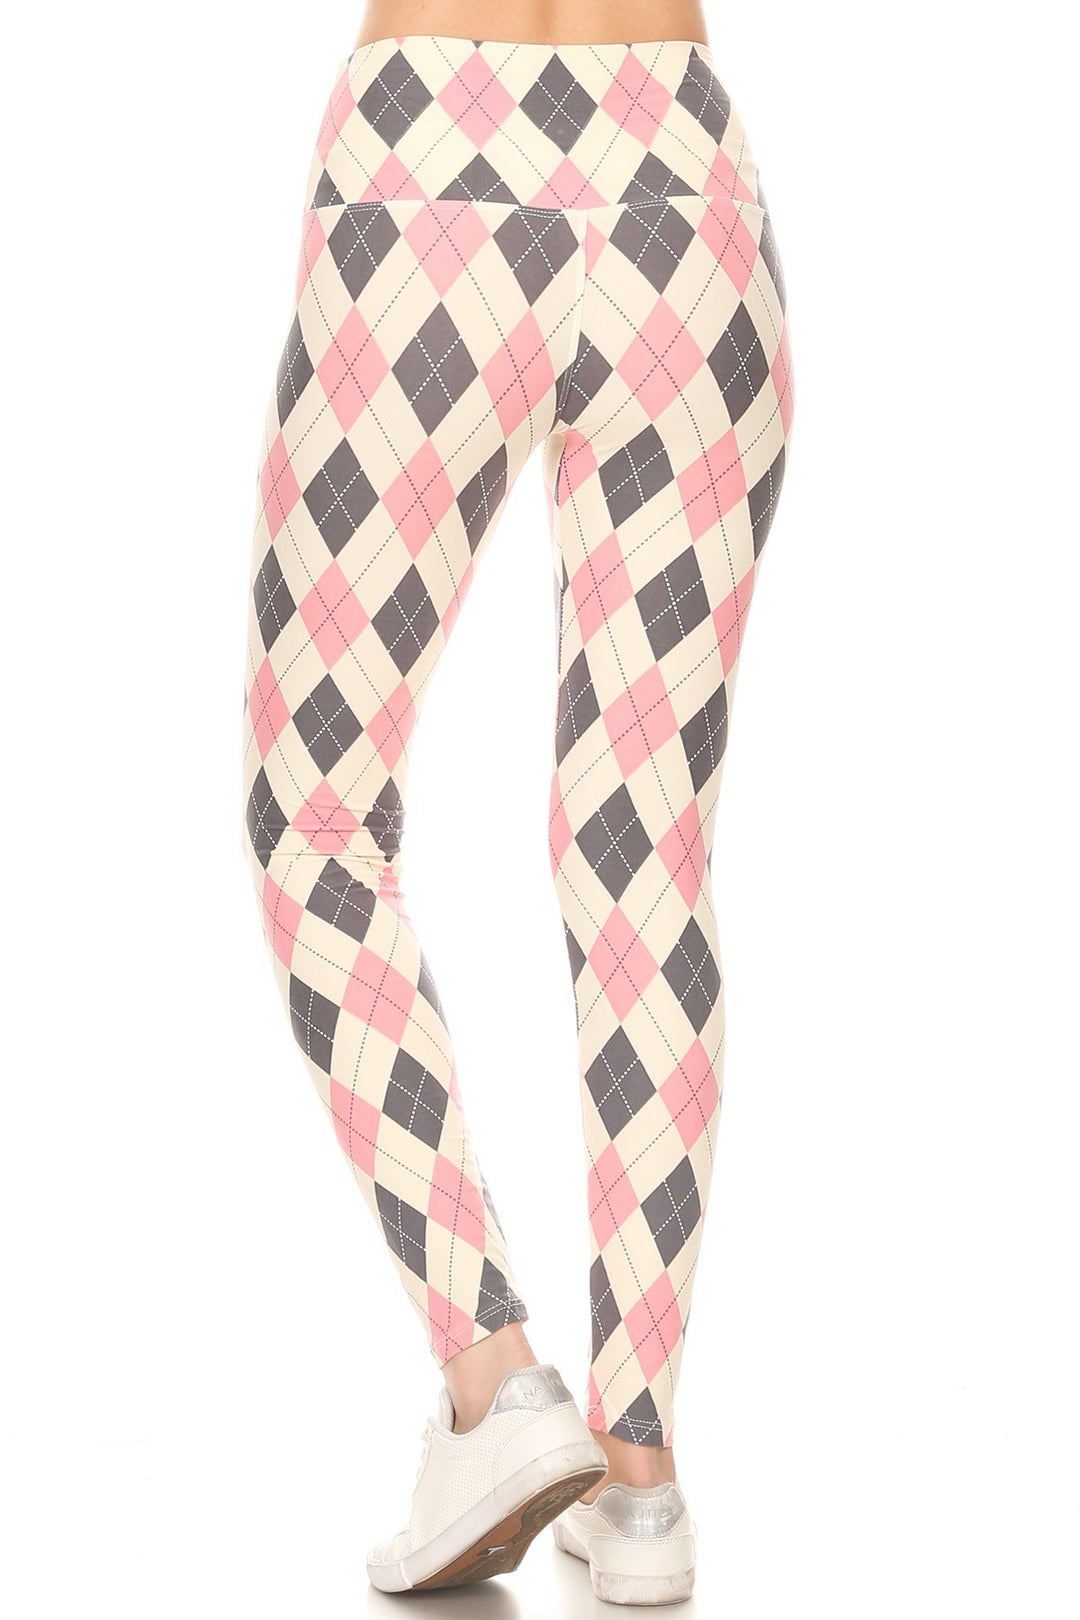 5-inch Long Yoga Style Banded Lined Argyle Printed Knit Legging With High Waist - bertofonsi